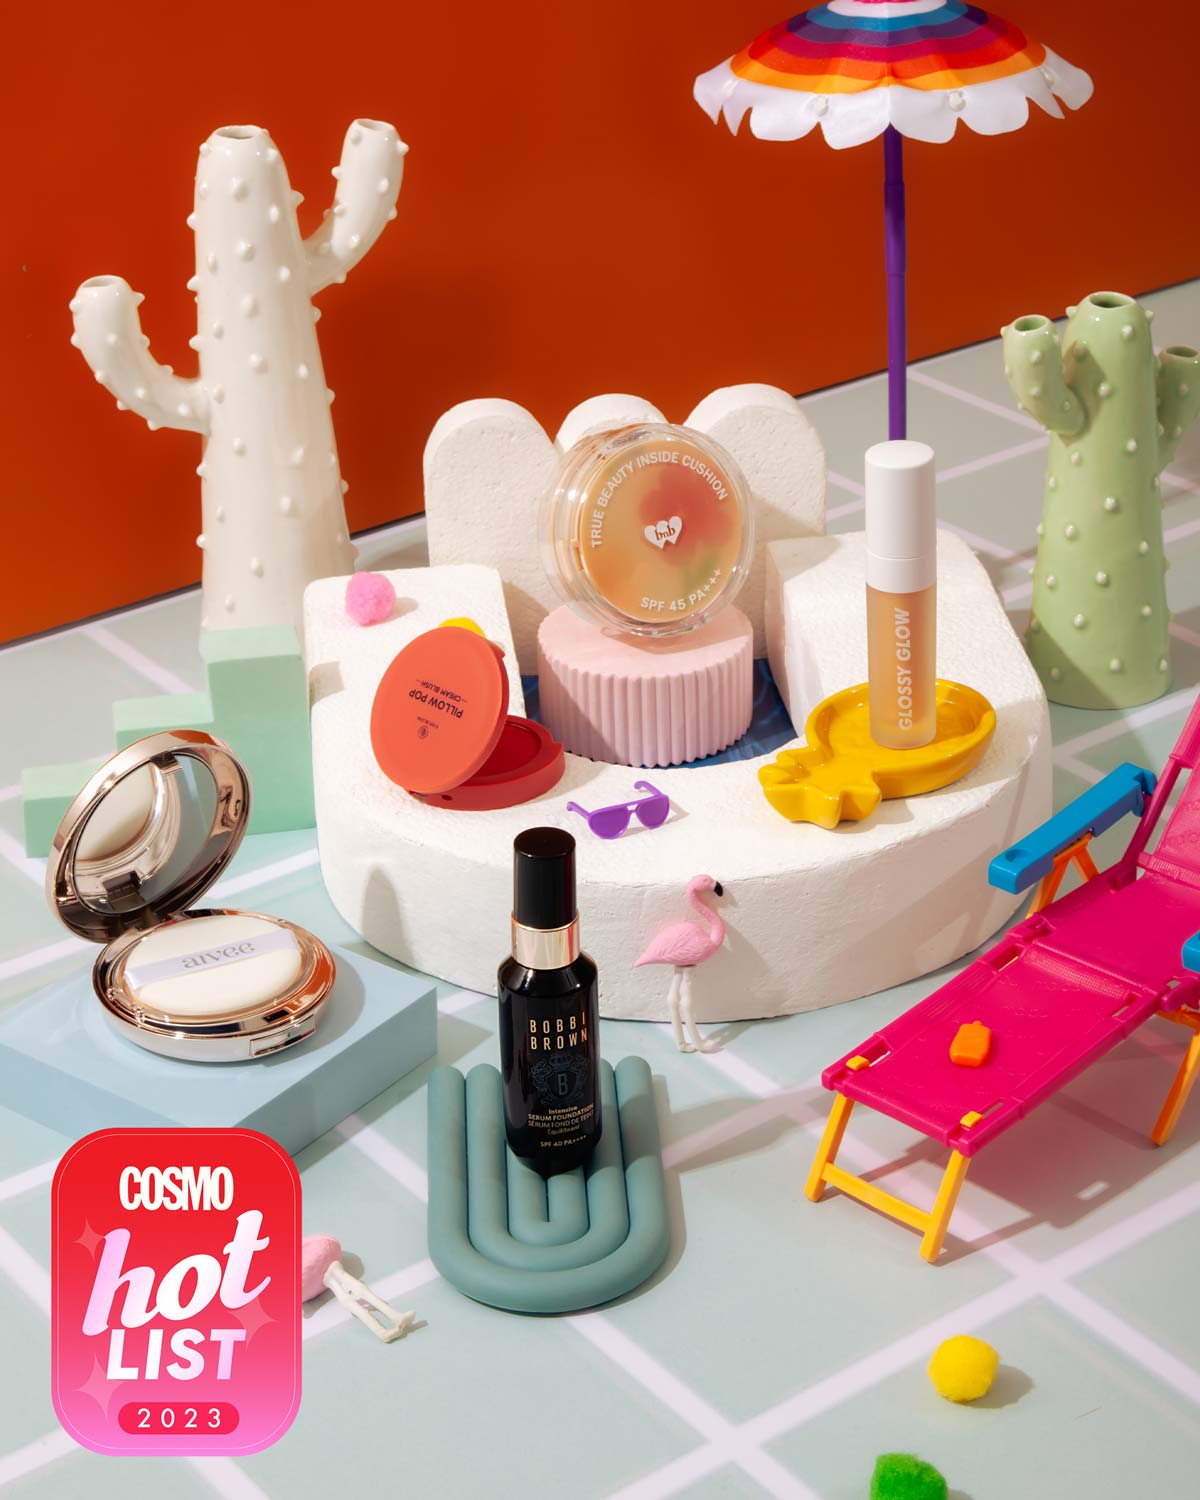 Cosmo Hot List 2023: Makeup products